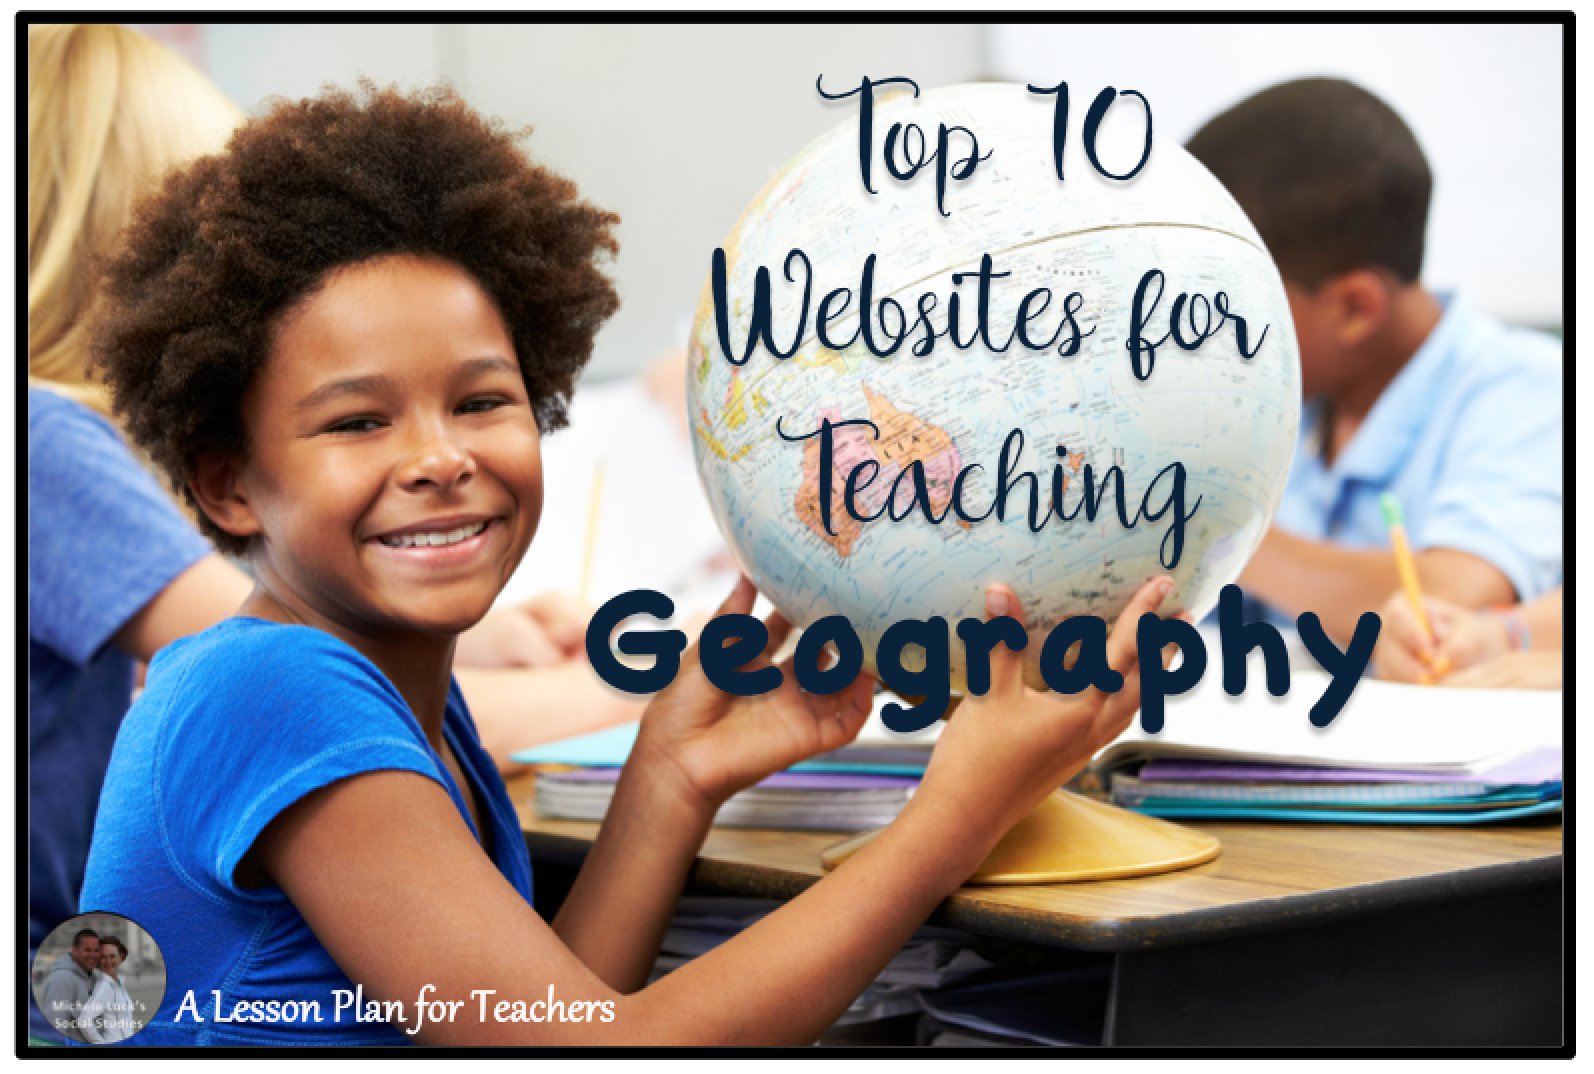 Top 10 Websites for Teaching Geography in the Social Studies Classroom